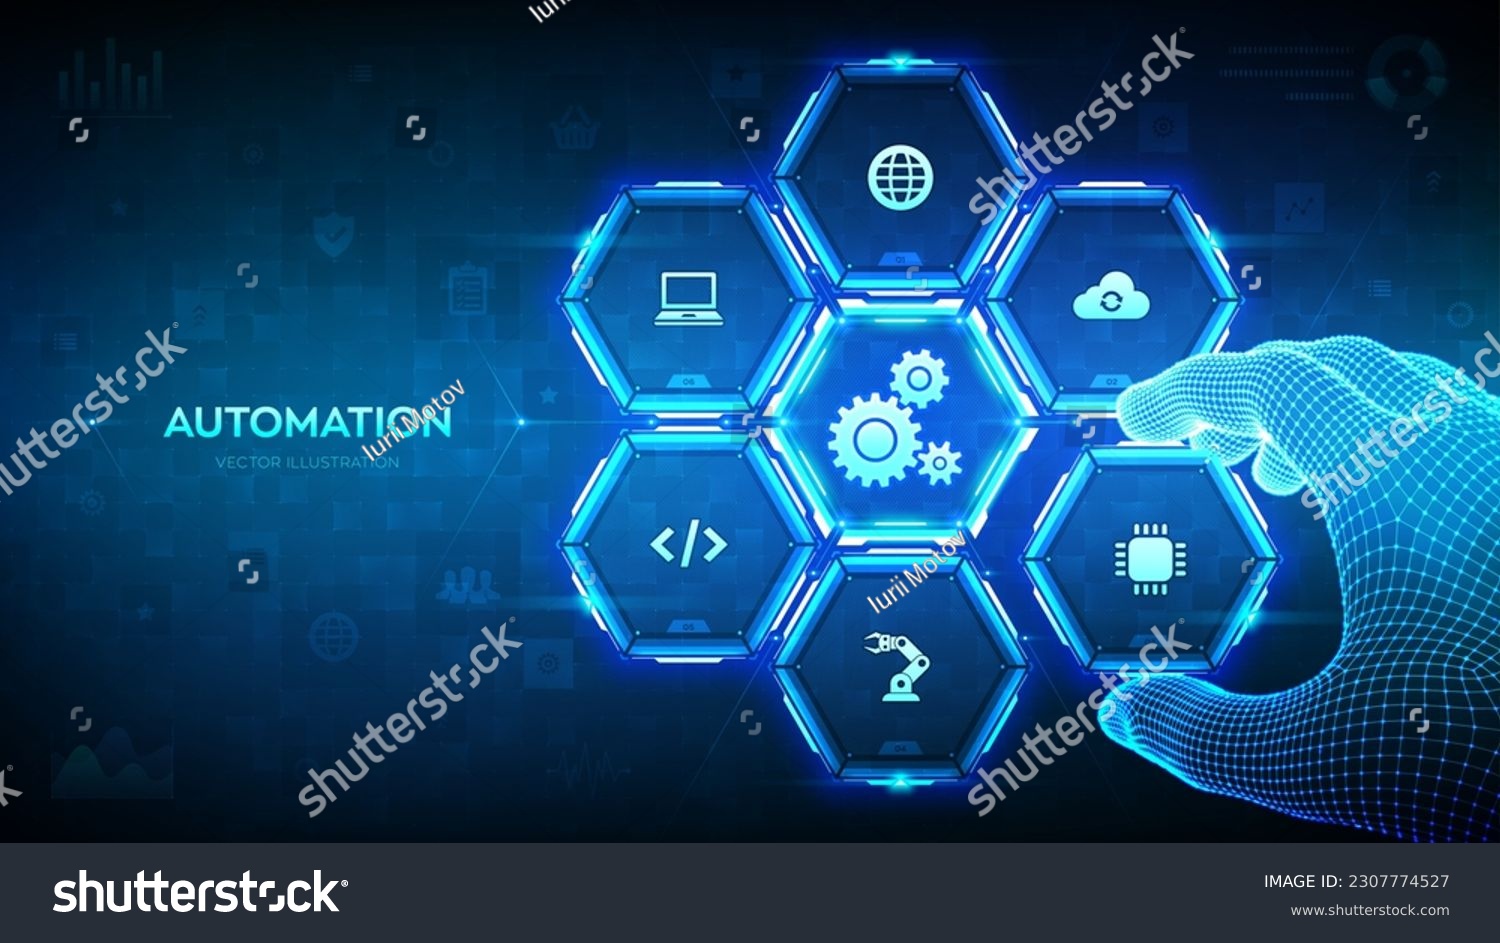 Automation Software. IOT and Automation concept as an innovation, improving productivity in technology. Wireframe hand places an element into a composition visualizing Automation processes. Vector. #2307774527